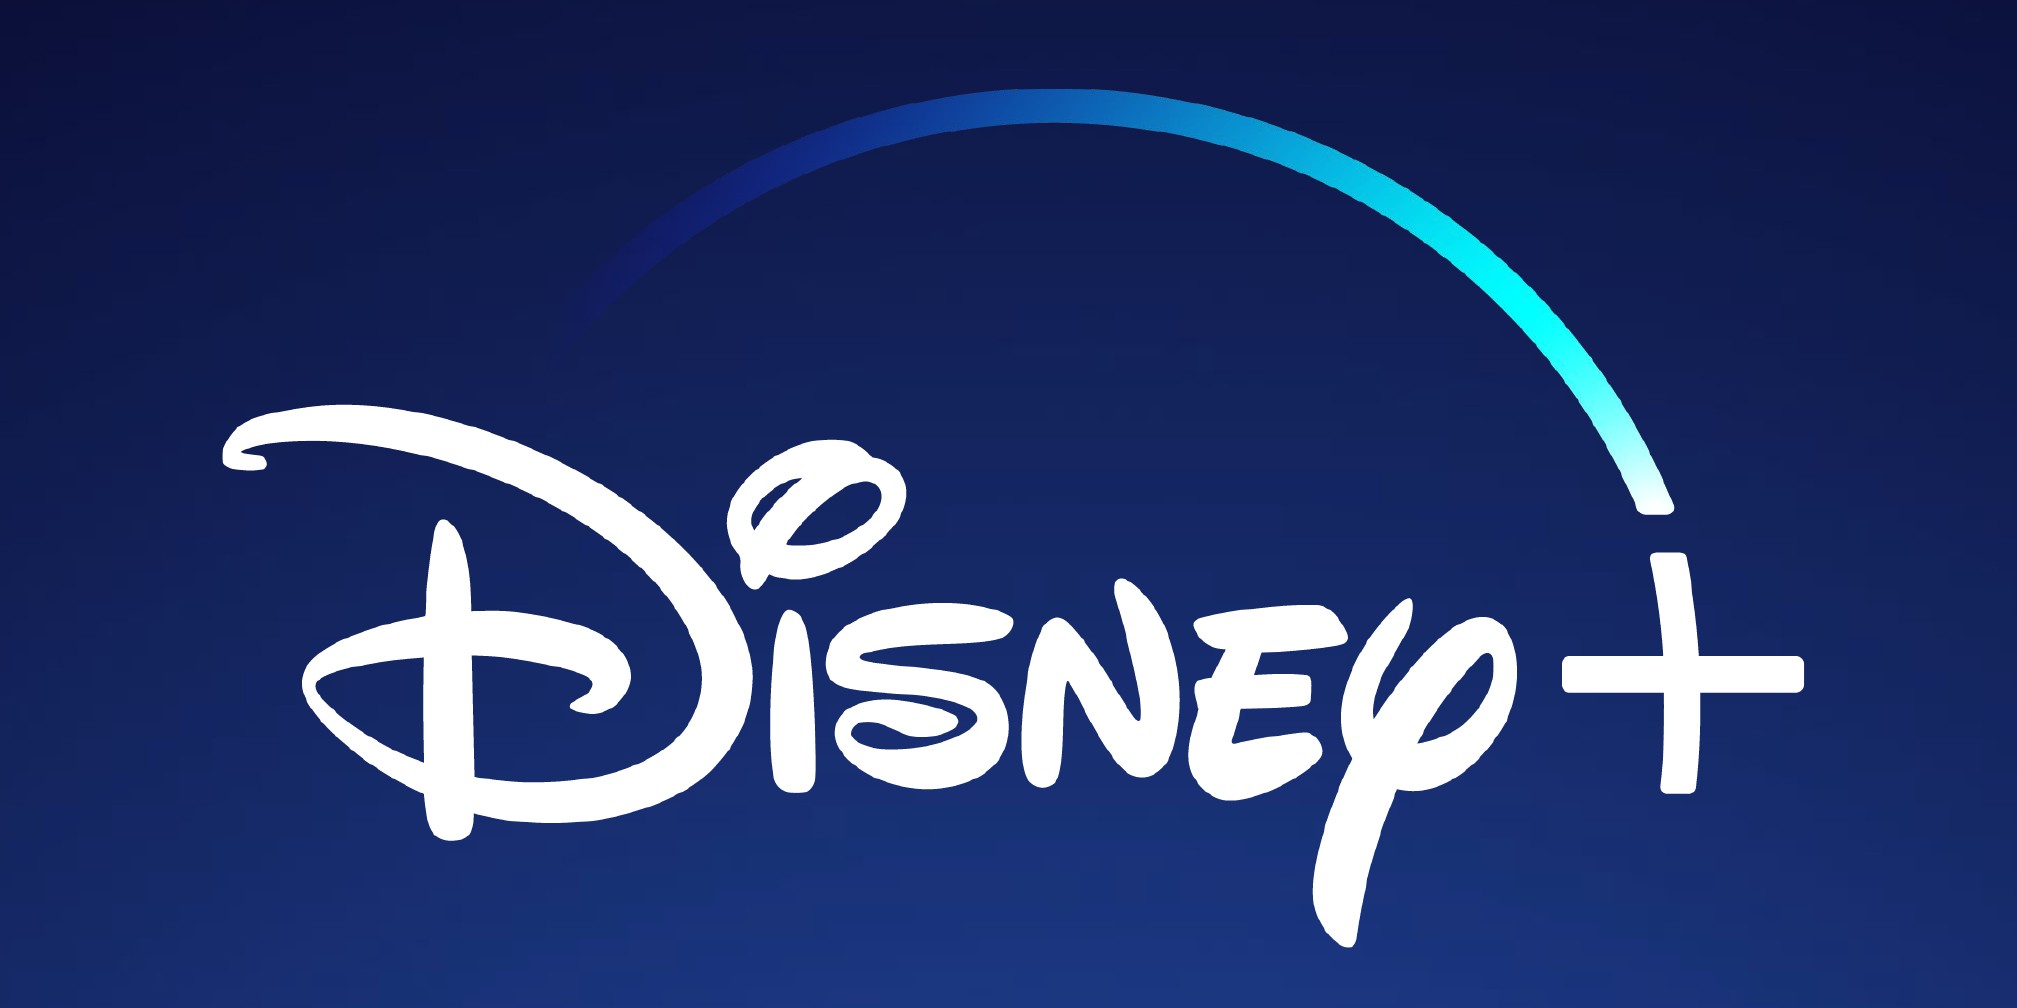 Disney+ is coming to Singapore in February 2021